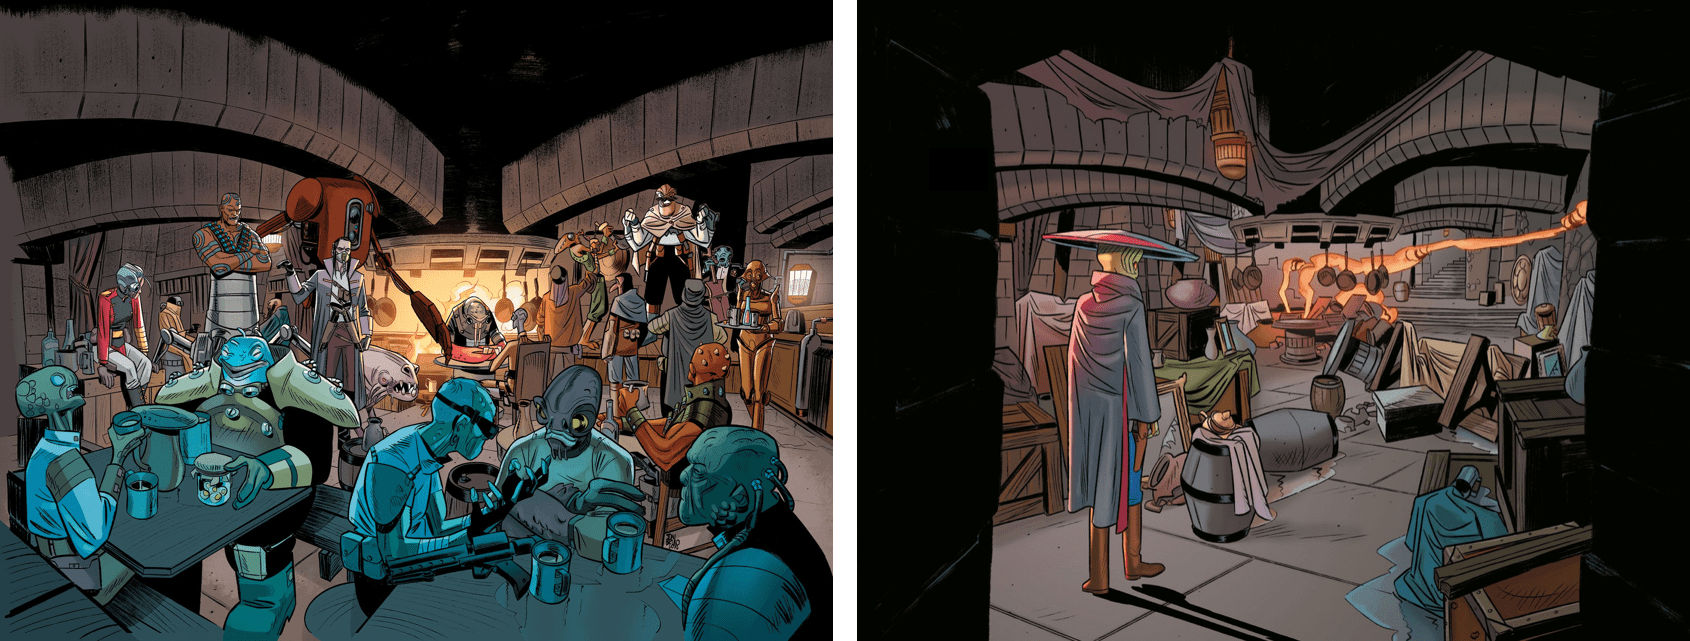 Contrasting shots of Maz Kanata's castle between Issue 1 and 7. Issue 1 shows it full of life. Issue 7 shows Sav sneaking into the same room, violently destroyed.